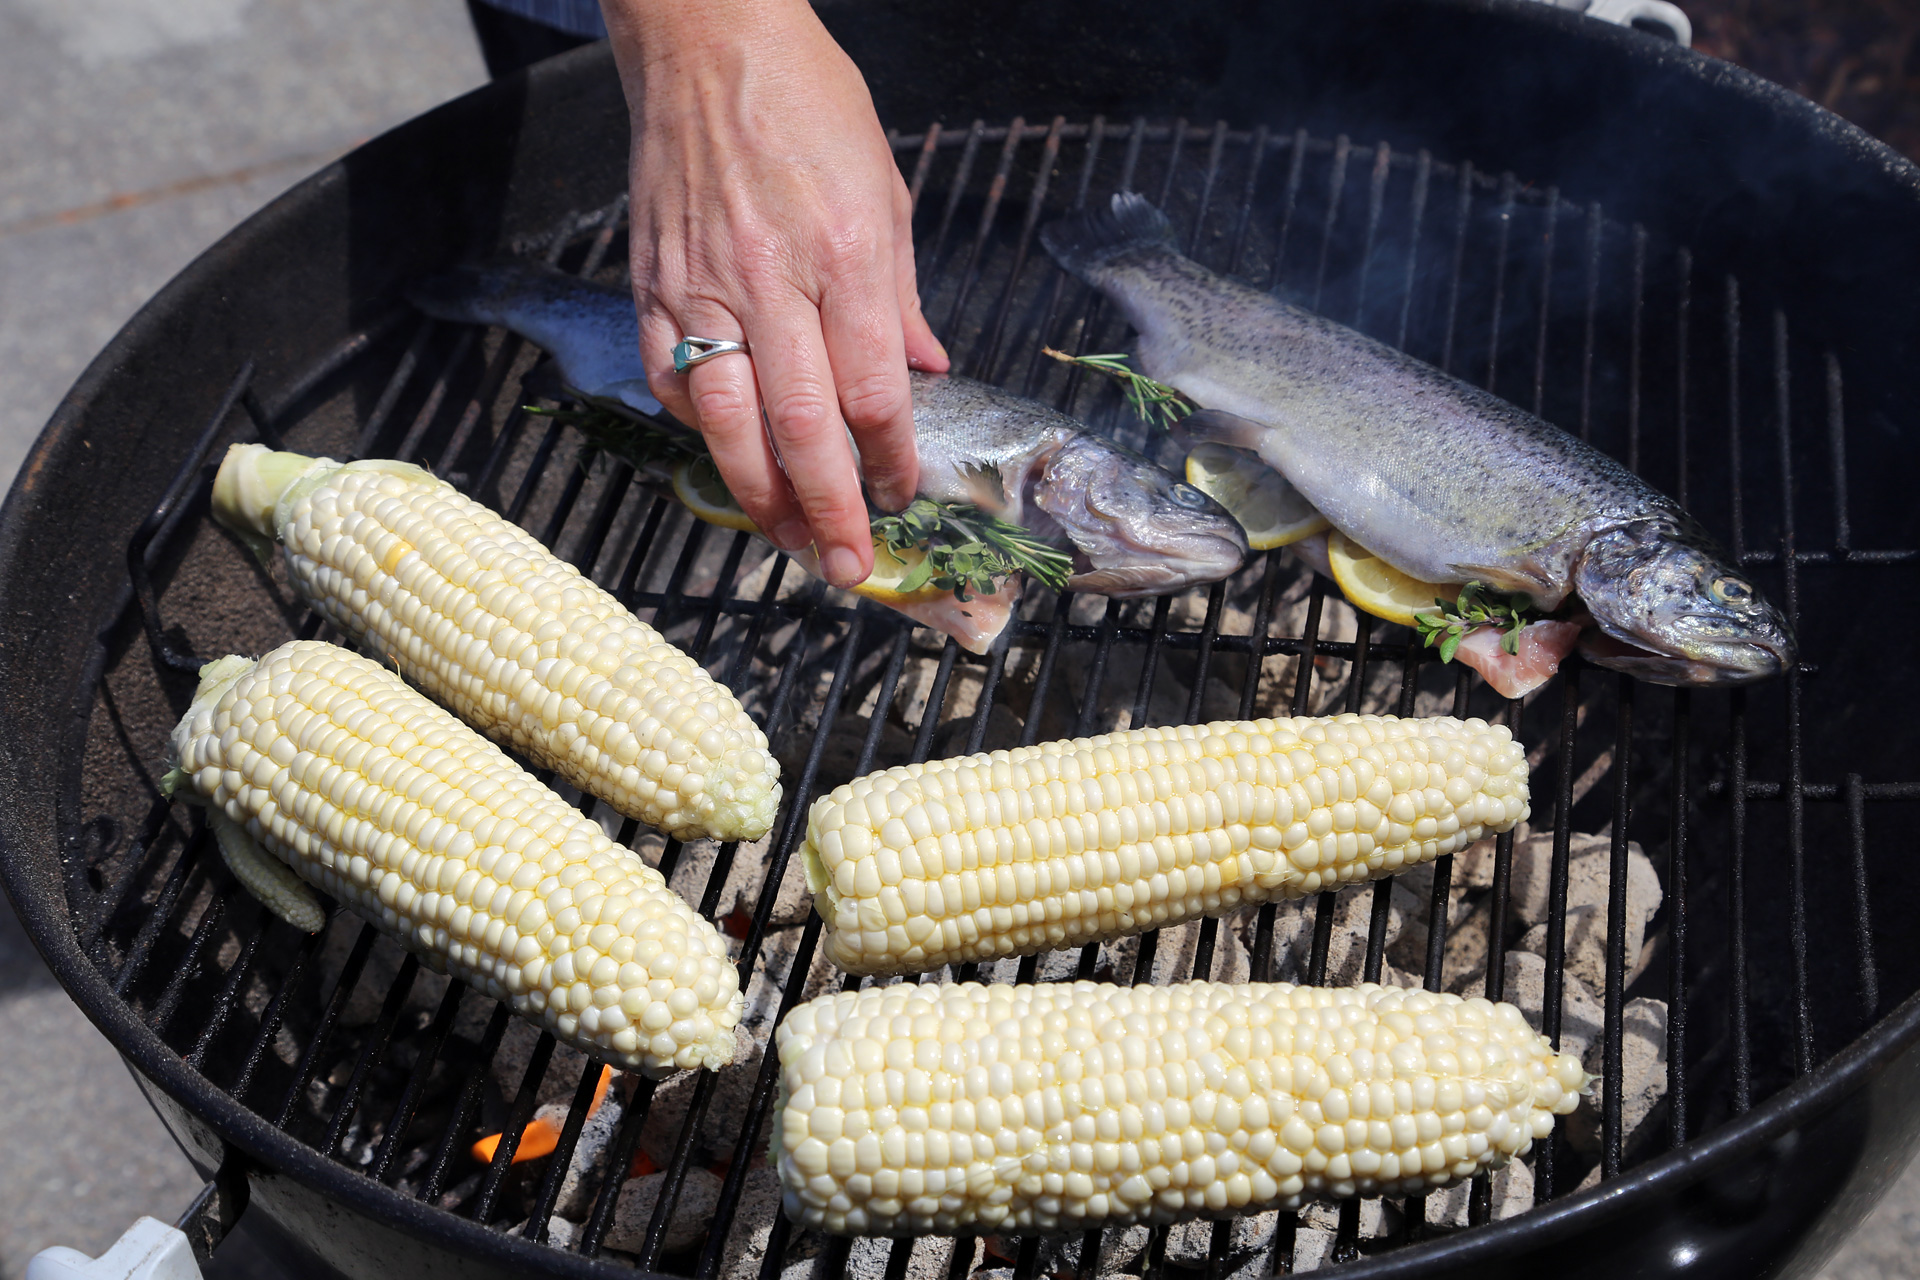 Add the trout to the grill directly over the fire.